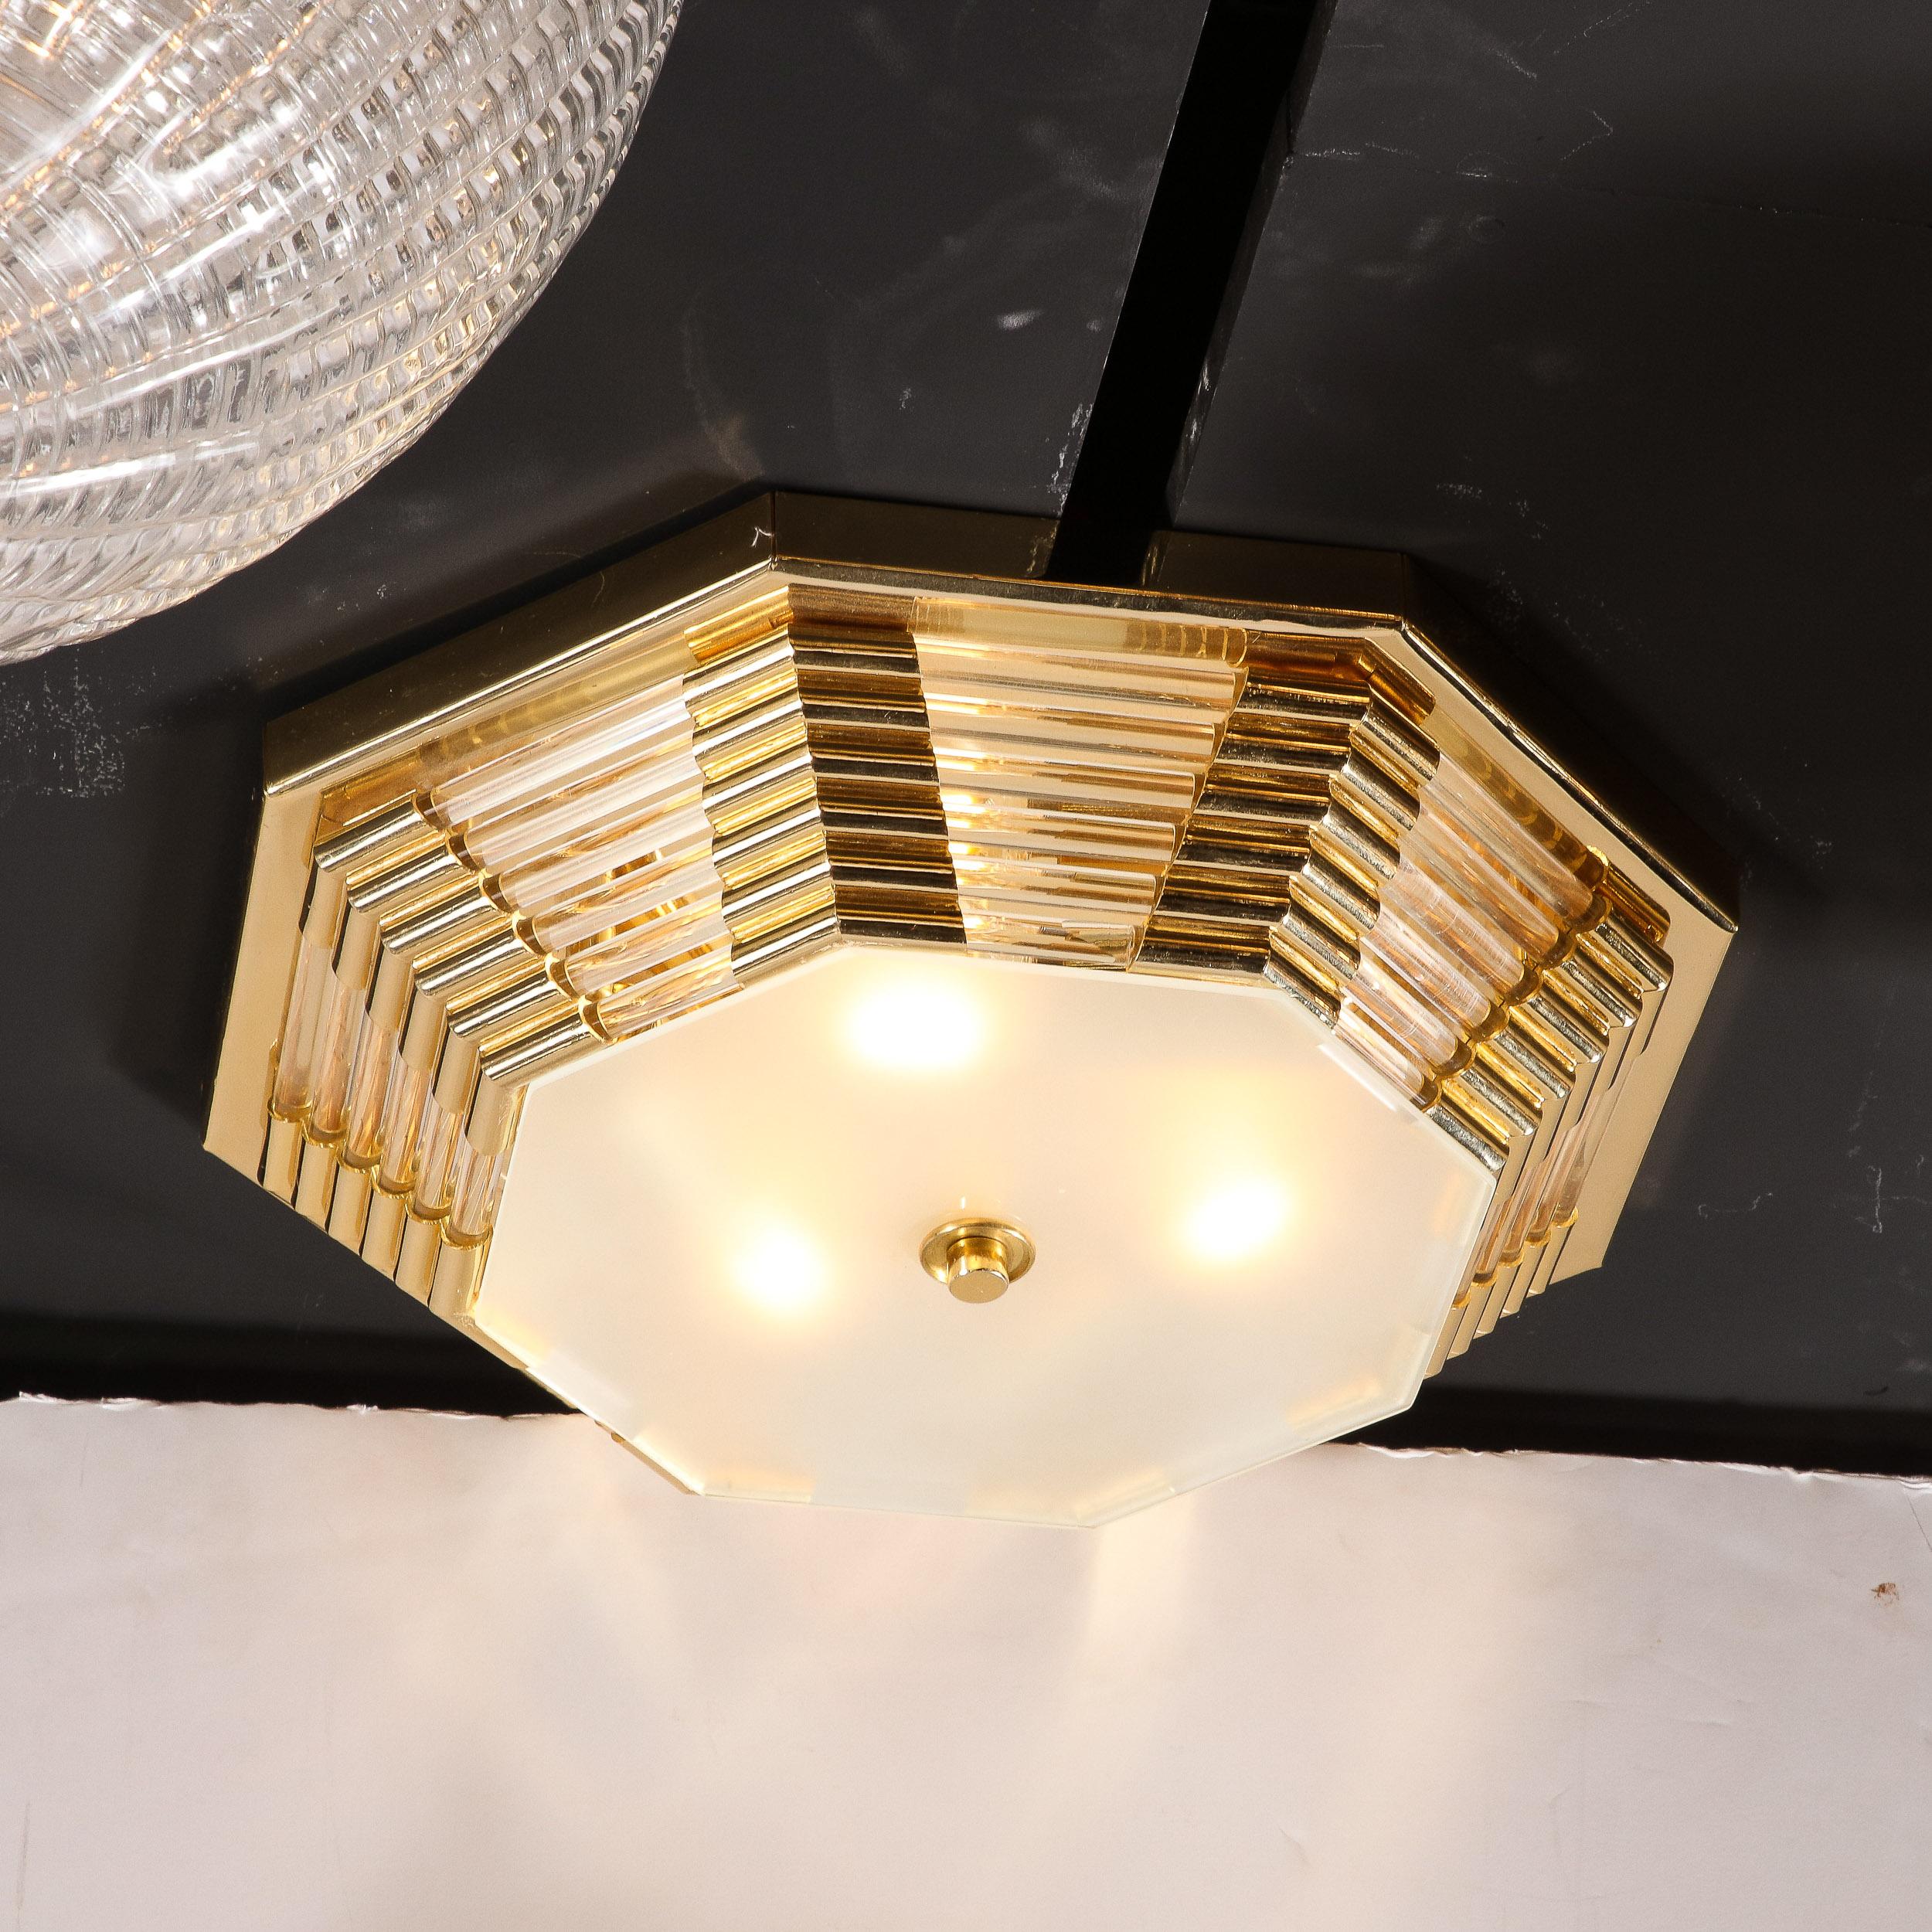 Italian Modernist Octagonal Brass w/ Glass Rods & Frosted Shade Flush Mount Chandelier For Sale